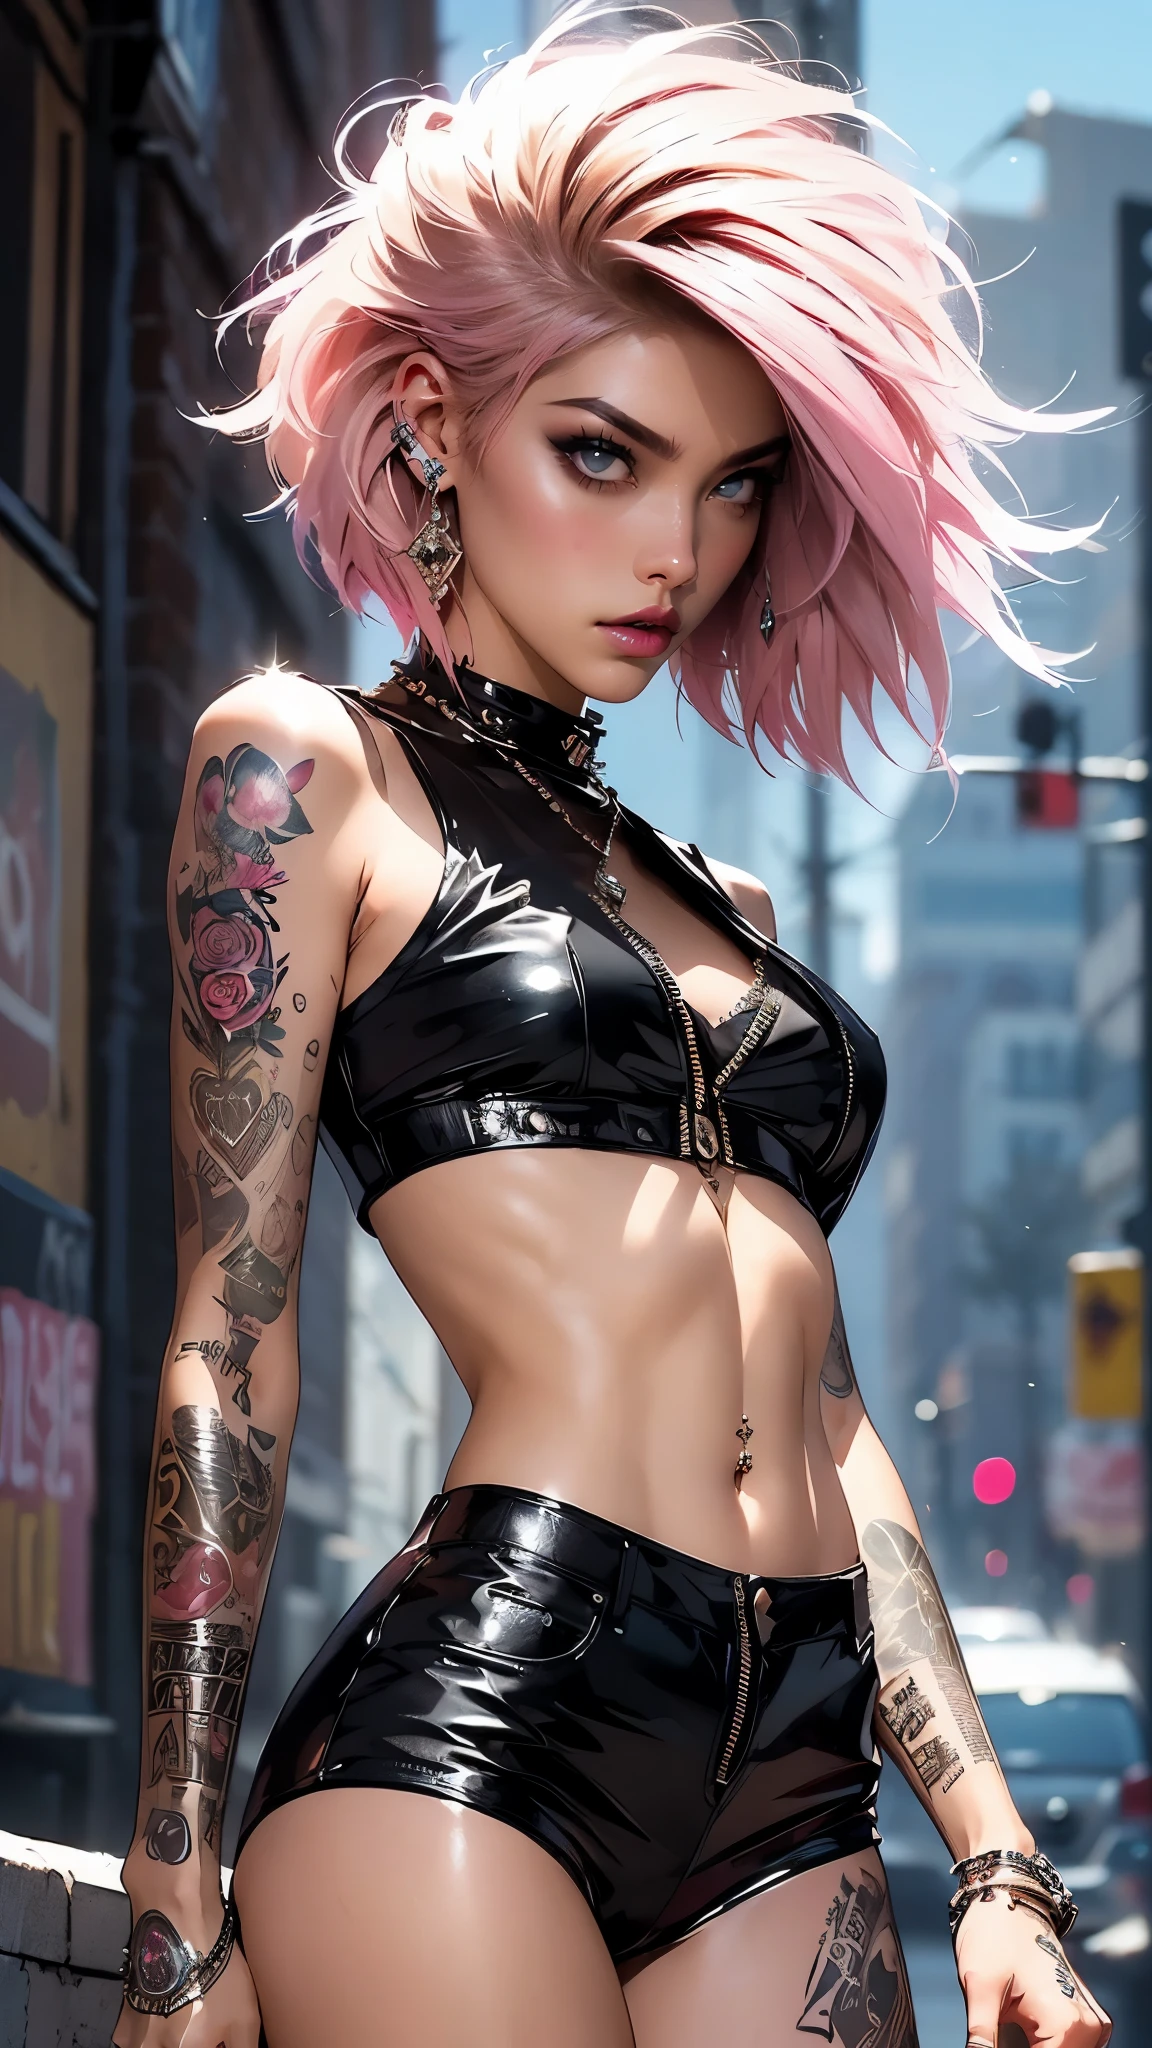 (((of the highest quality: 1.4))),(incomparable masterpiece ever), (ultra high definition),(Ultra-realistic 8k CG), Official Art、 (((adult body))), (((1 girl in))), ((( short hair bob ))), Punk girl with a perfect body, Jacket with metal spikes.,Beautiful and well-groomed face.,,Detailed punk fashion,leather jackets, (Image from head to thigh.),((Pink short hair bob )), Small leather panties, Simon Bisley&#39;s wild urban style,Detailed London street background,clean abs, Complex graphics, dark pink with white stars and gray and white stripes,,,, (( Many poisonous tattoos )), piercings,